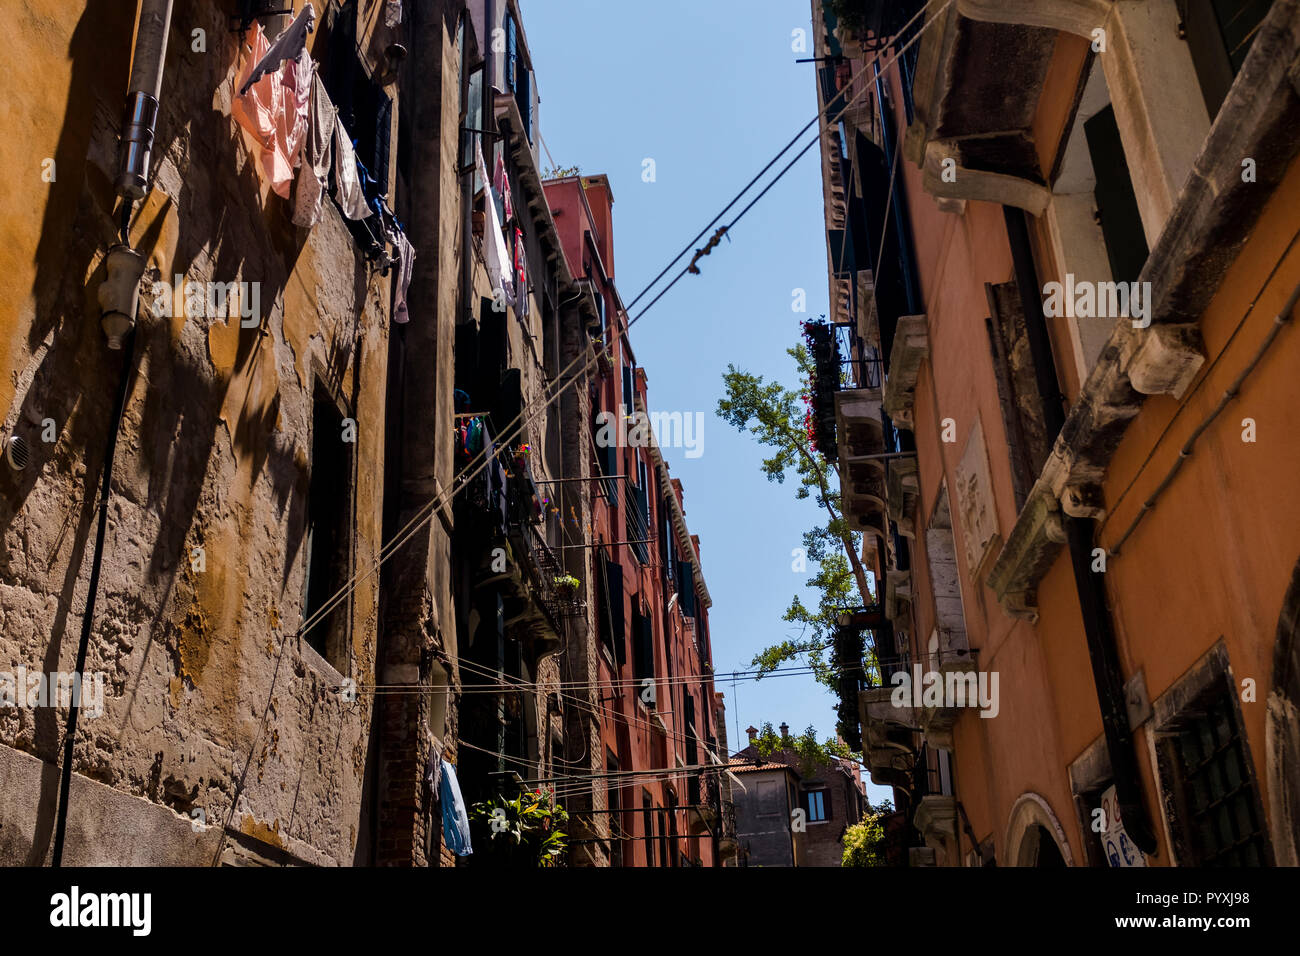 Scenes and details from Venice, Italy Stock Photo